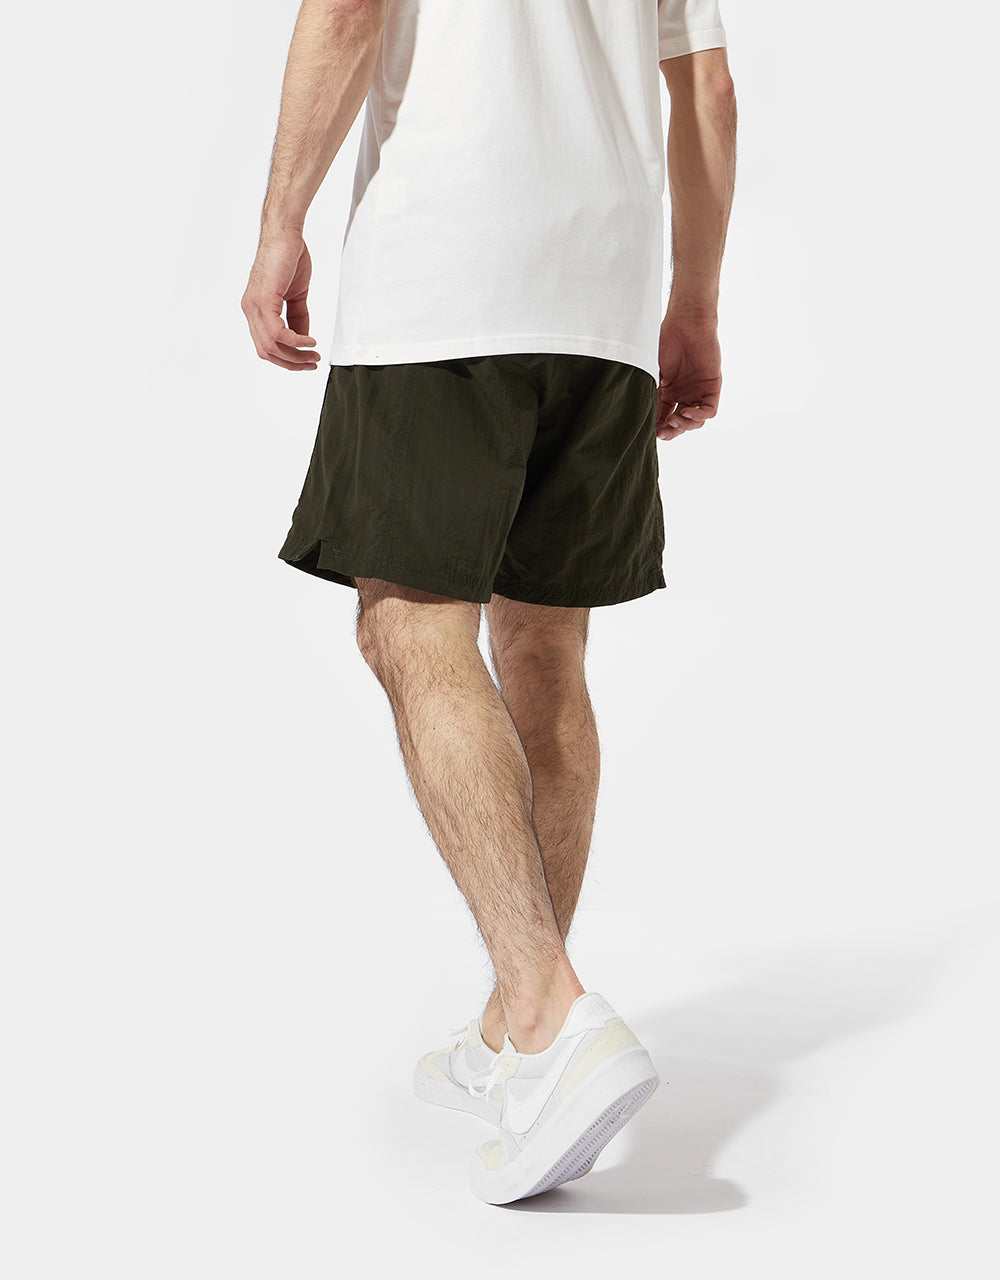 Route One Jammin Shorts - Olive